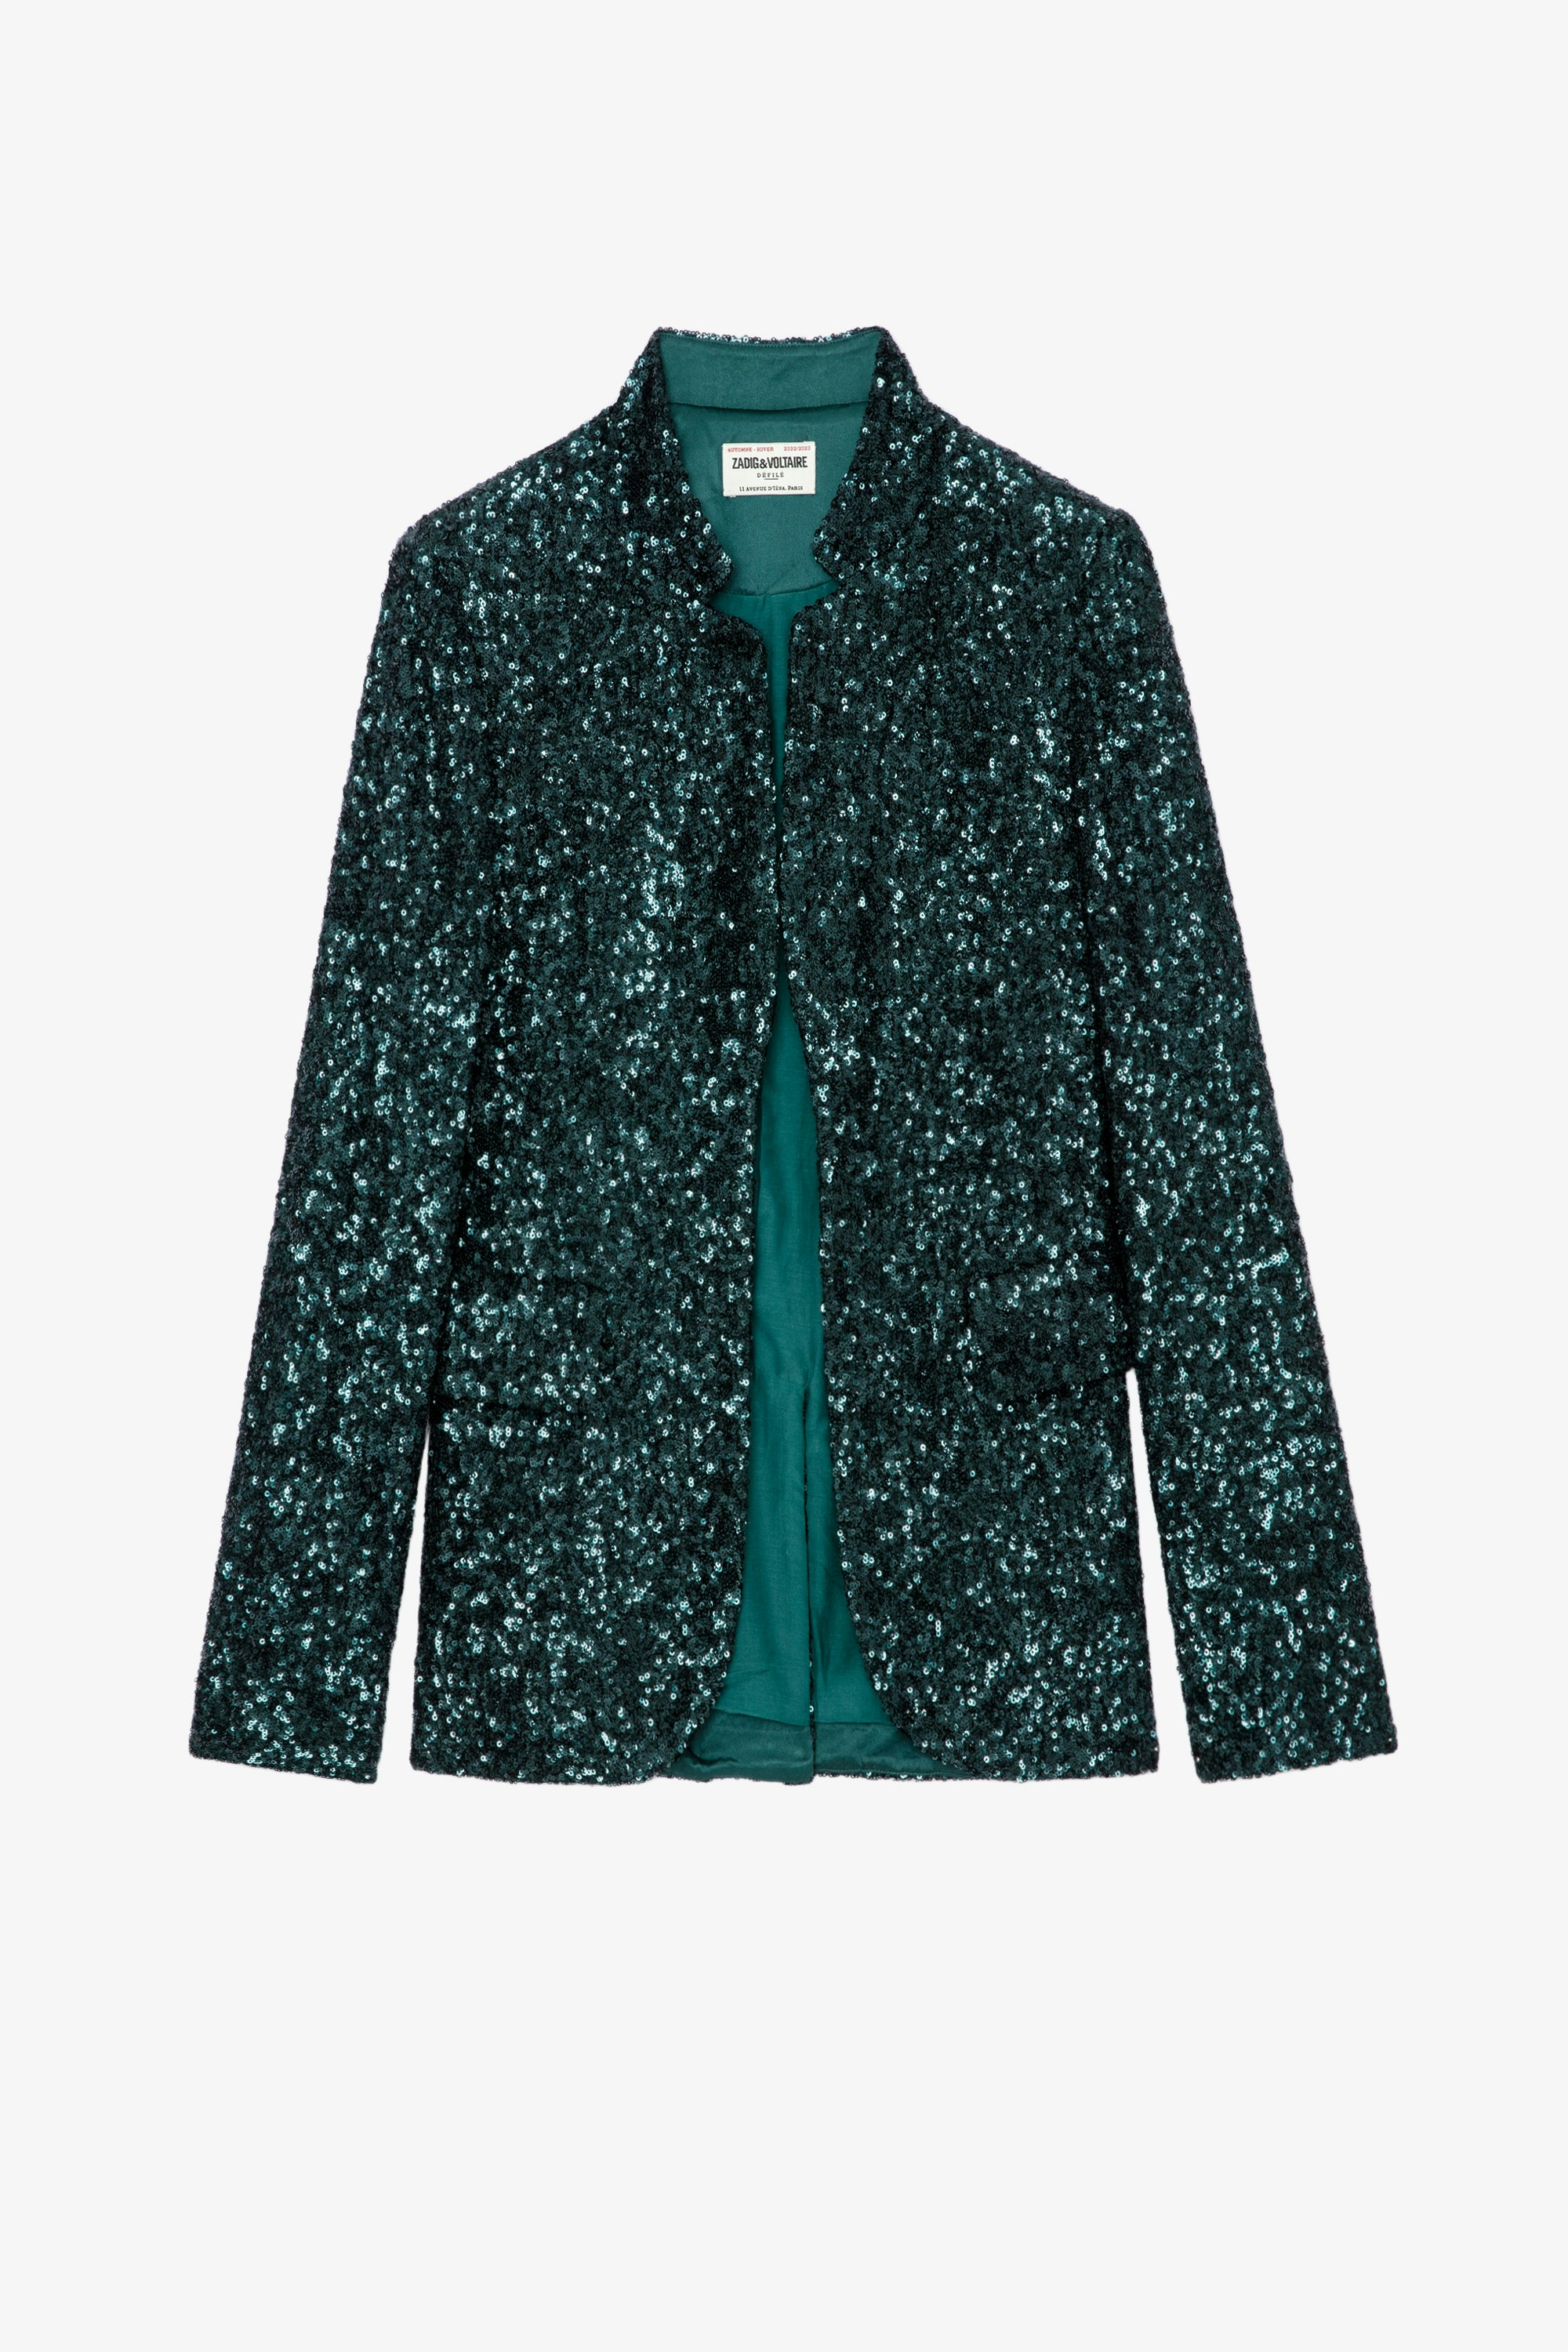 Very Sequins ジャケット Women's tailored jacket with all-over green sequins